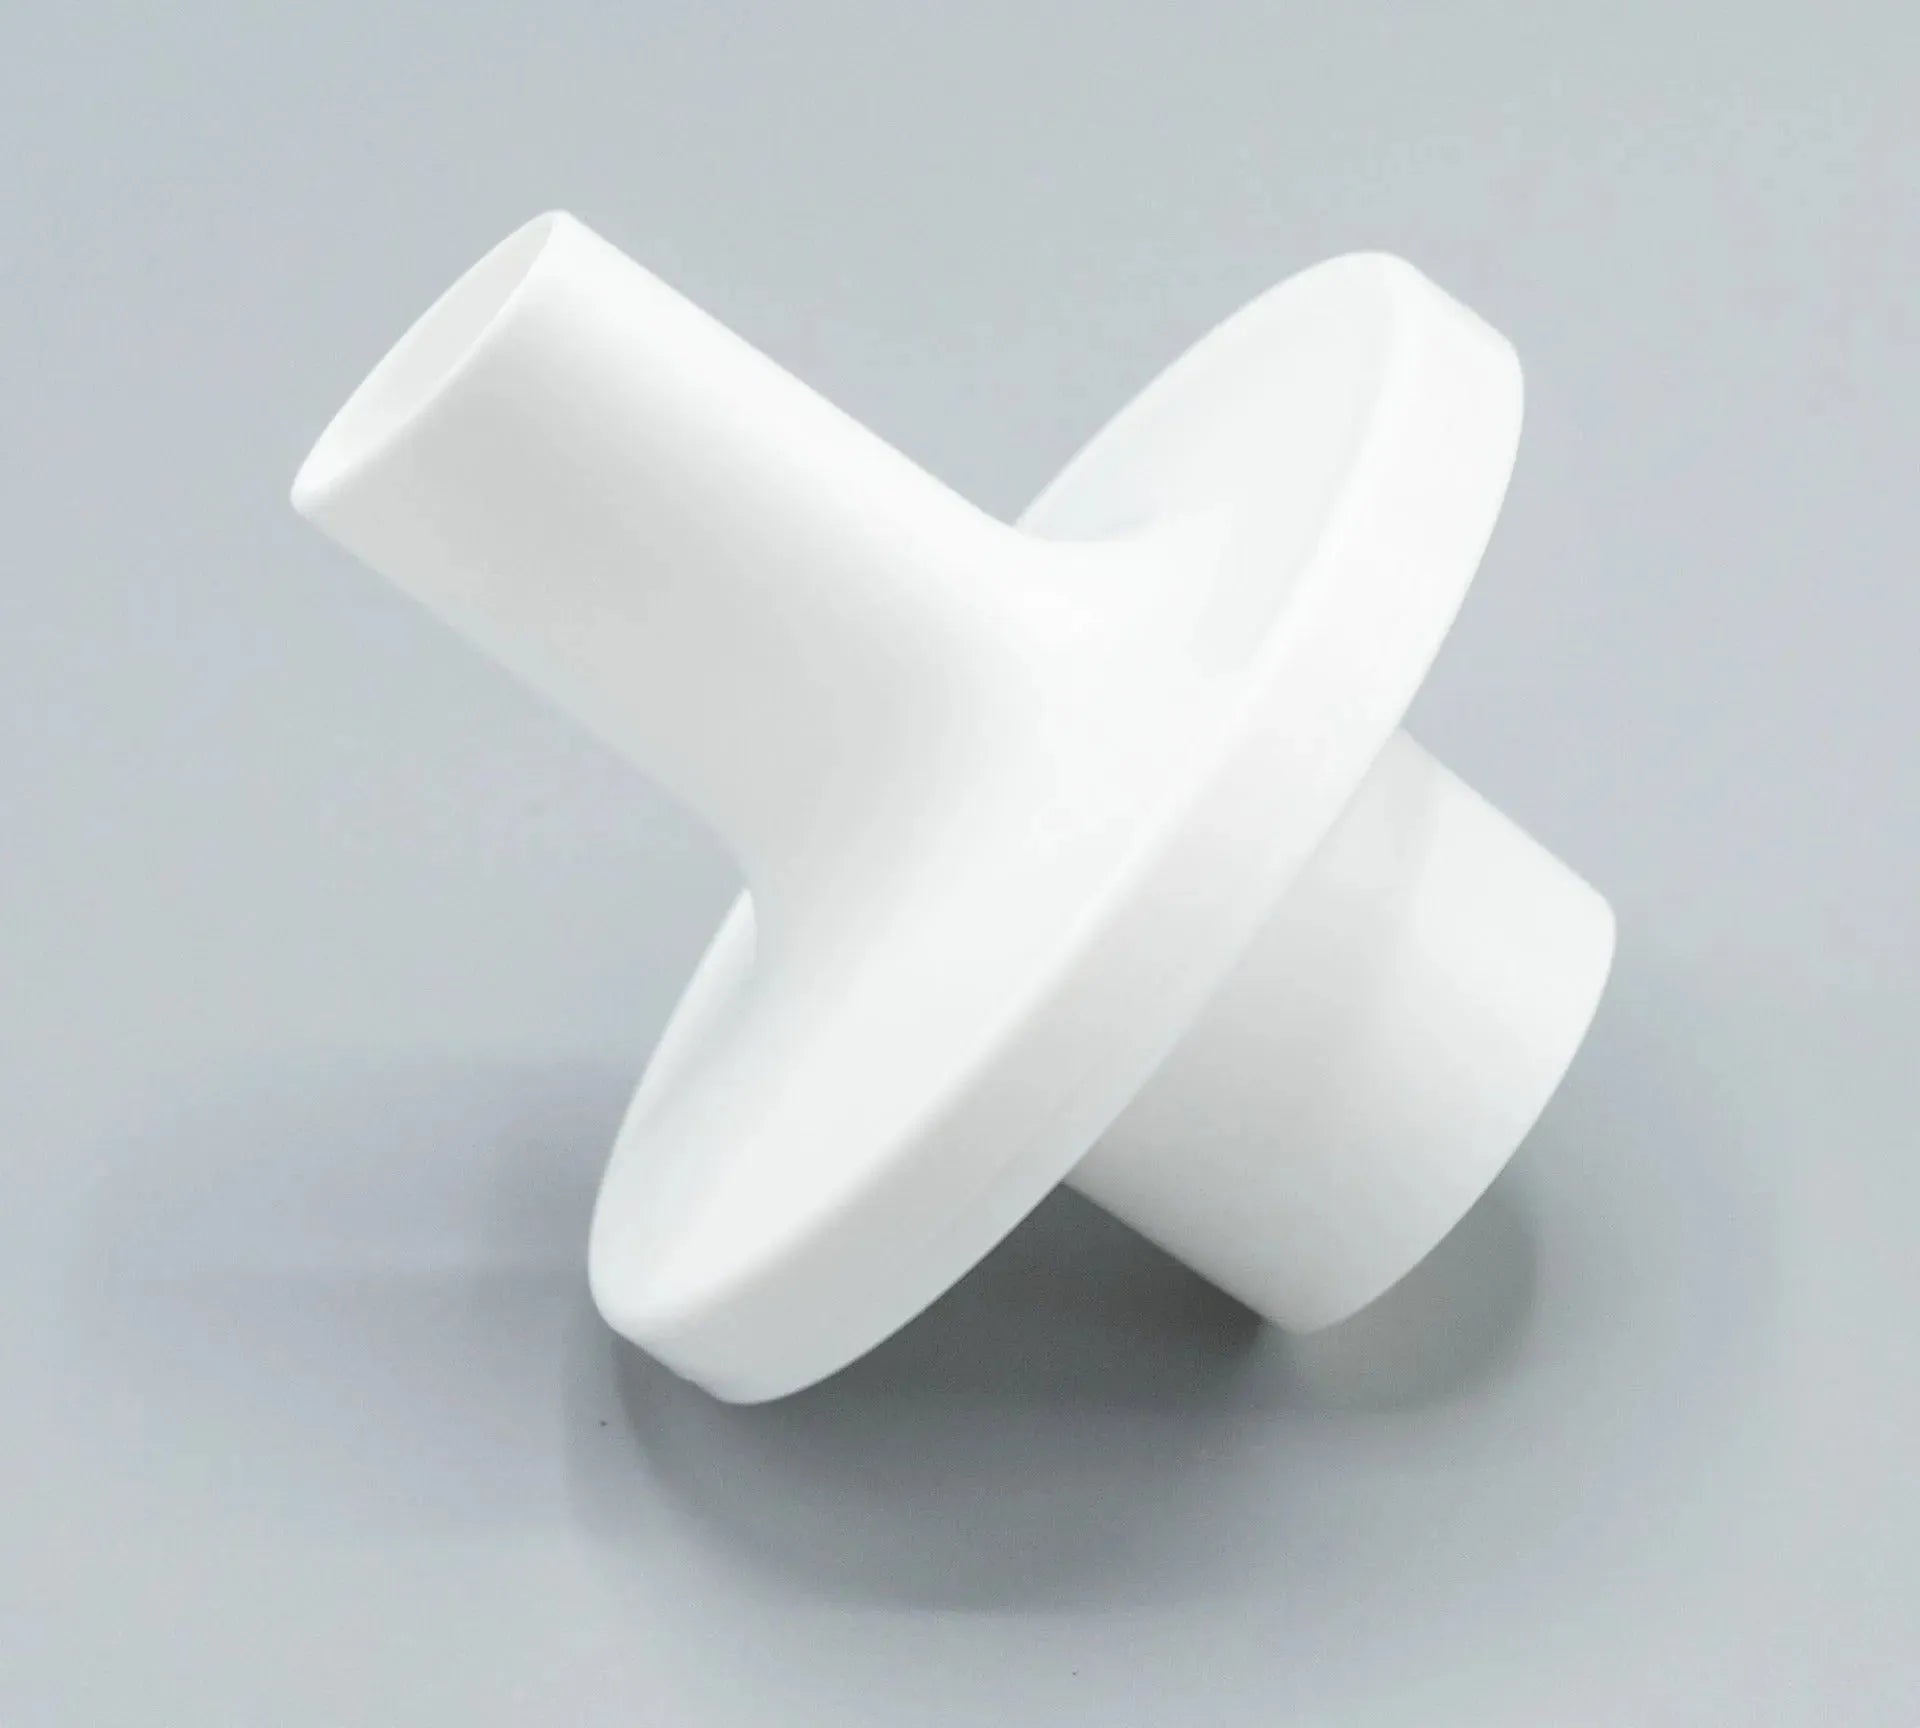 The Medical Graphics Elliptical (BVF) bacterial viral filter mouthpiece is elliptical in shape and white in color.